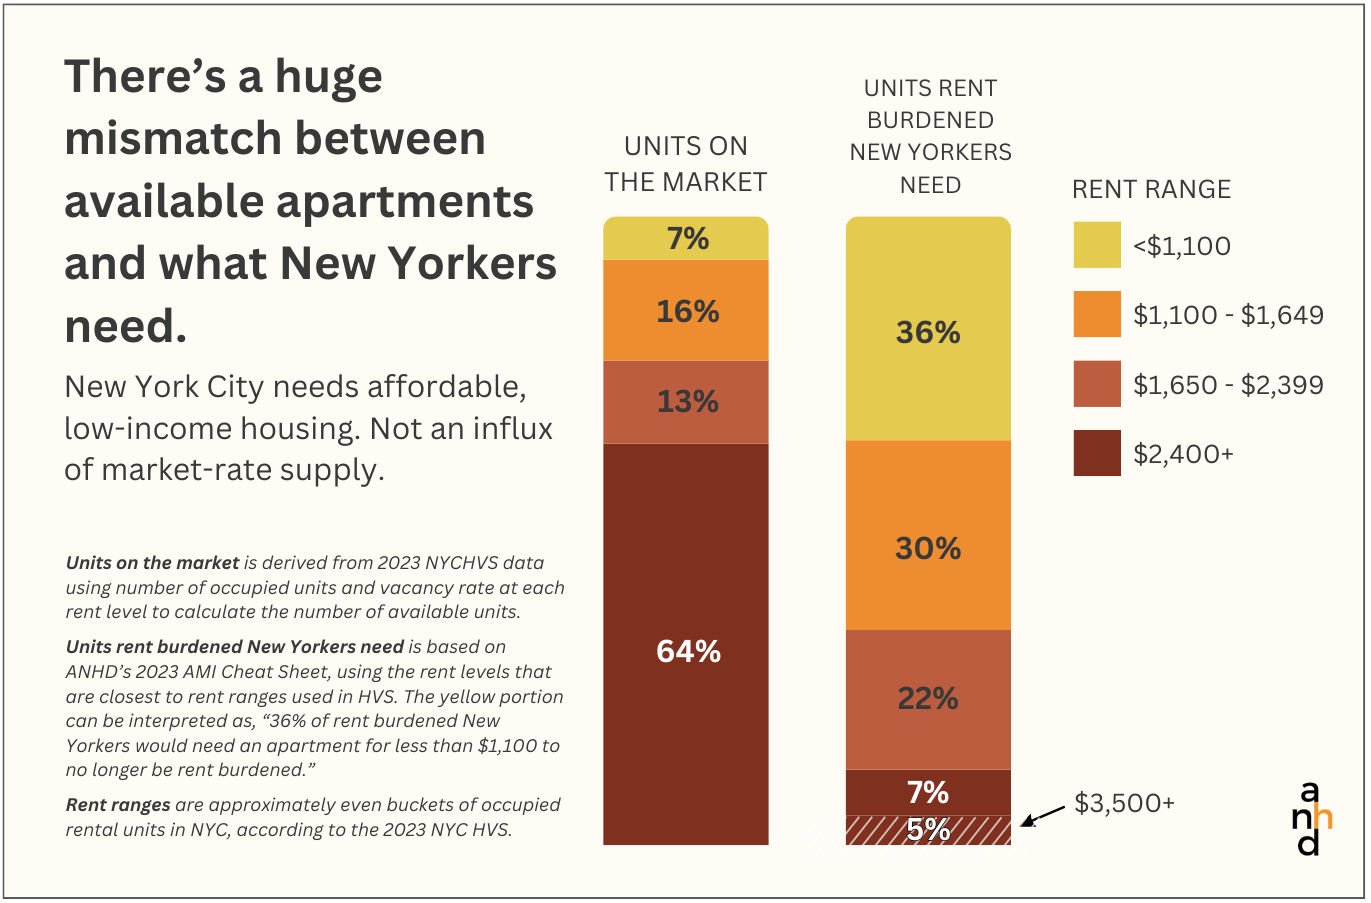 Mismatch between available apartments and what New Yorkers need